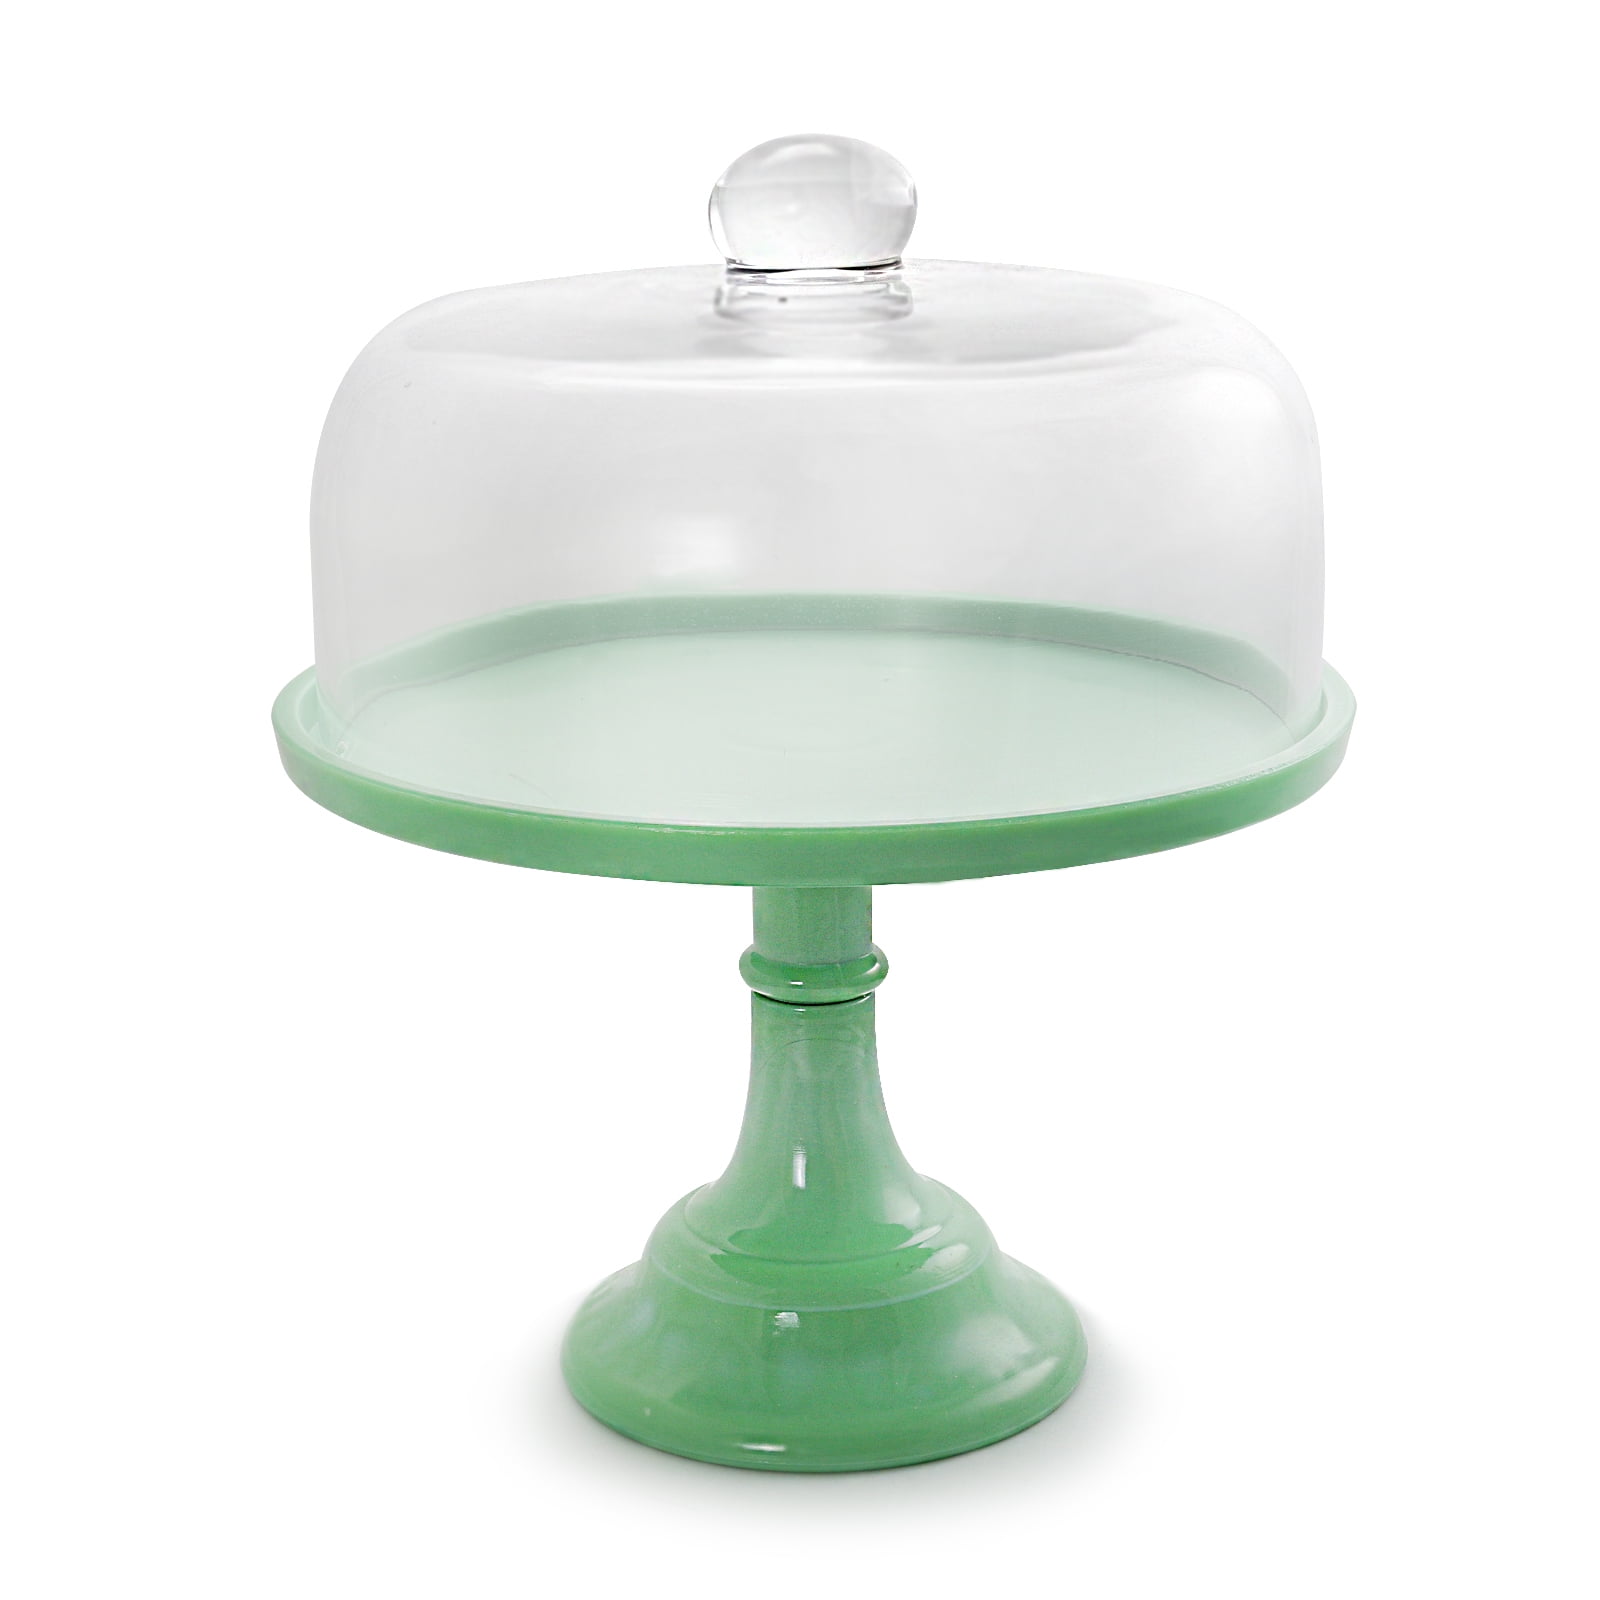 THE PIONEER WOMAN TIMELESS BEAUTY 10 CAKE STAND DOME JADITE GREEN Free Shipping 